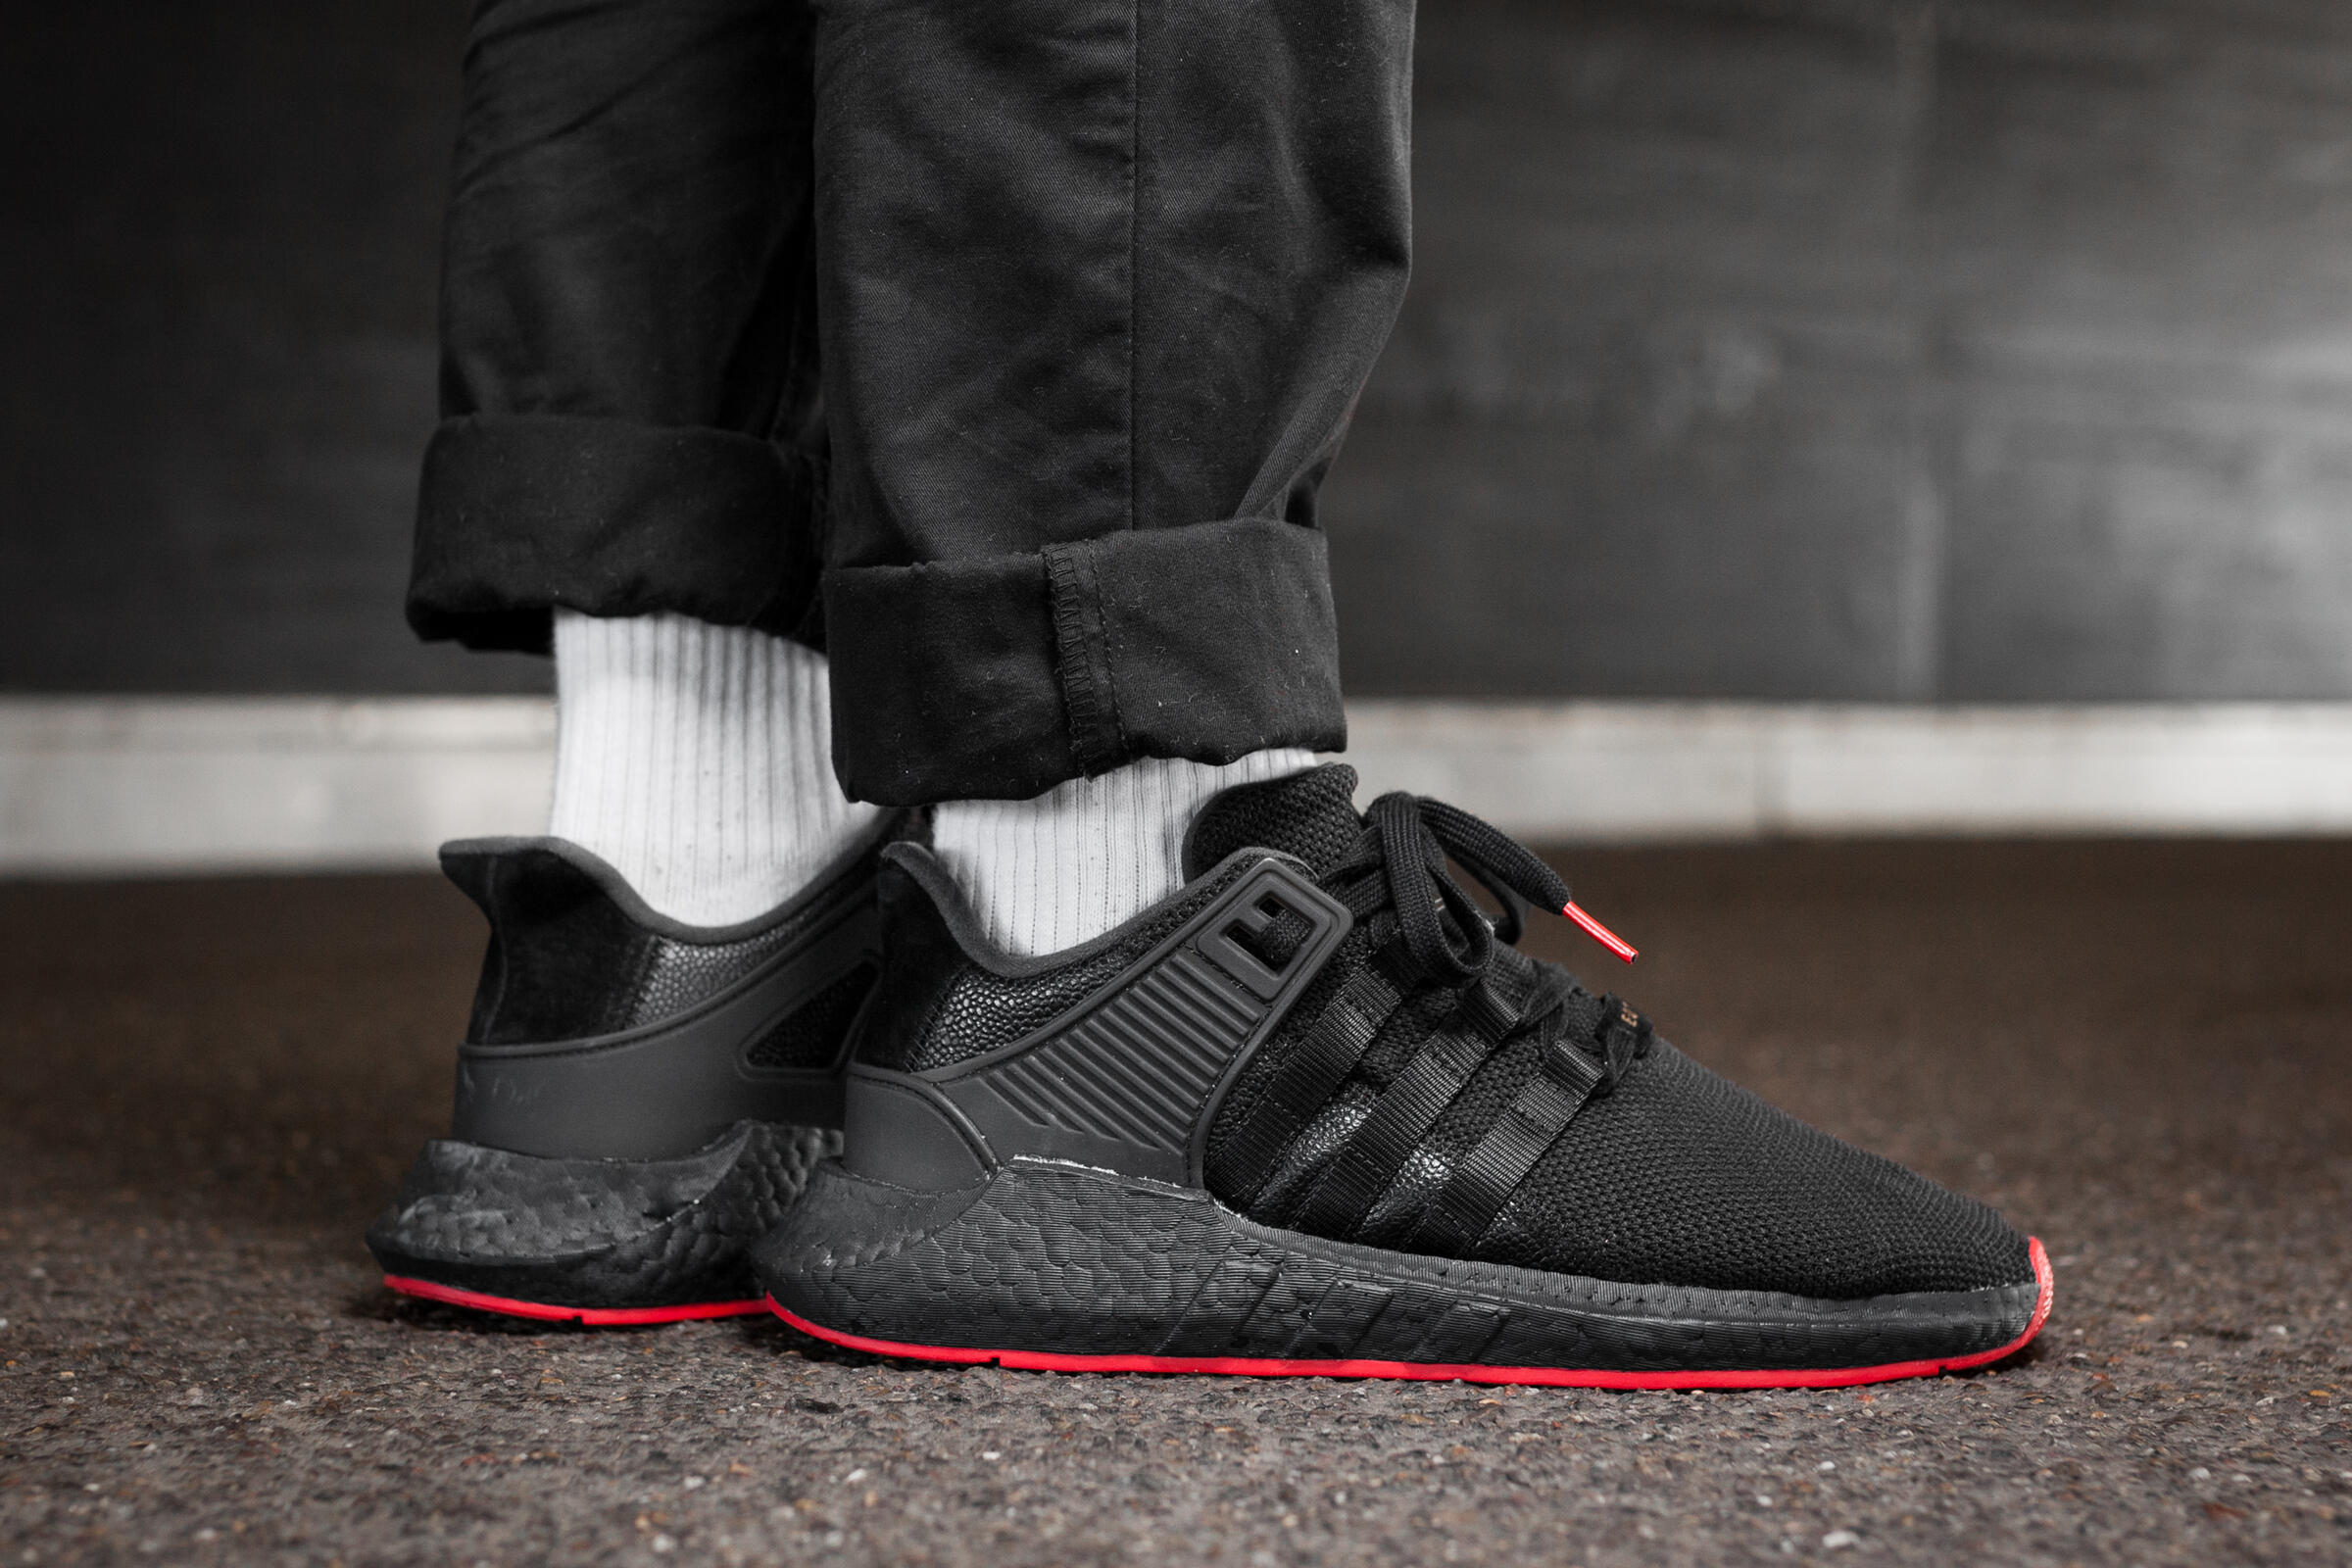 adidas Performance EQT Support 93/17 Red Carpet Pack